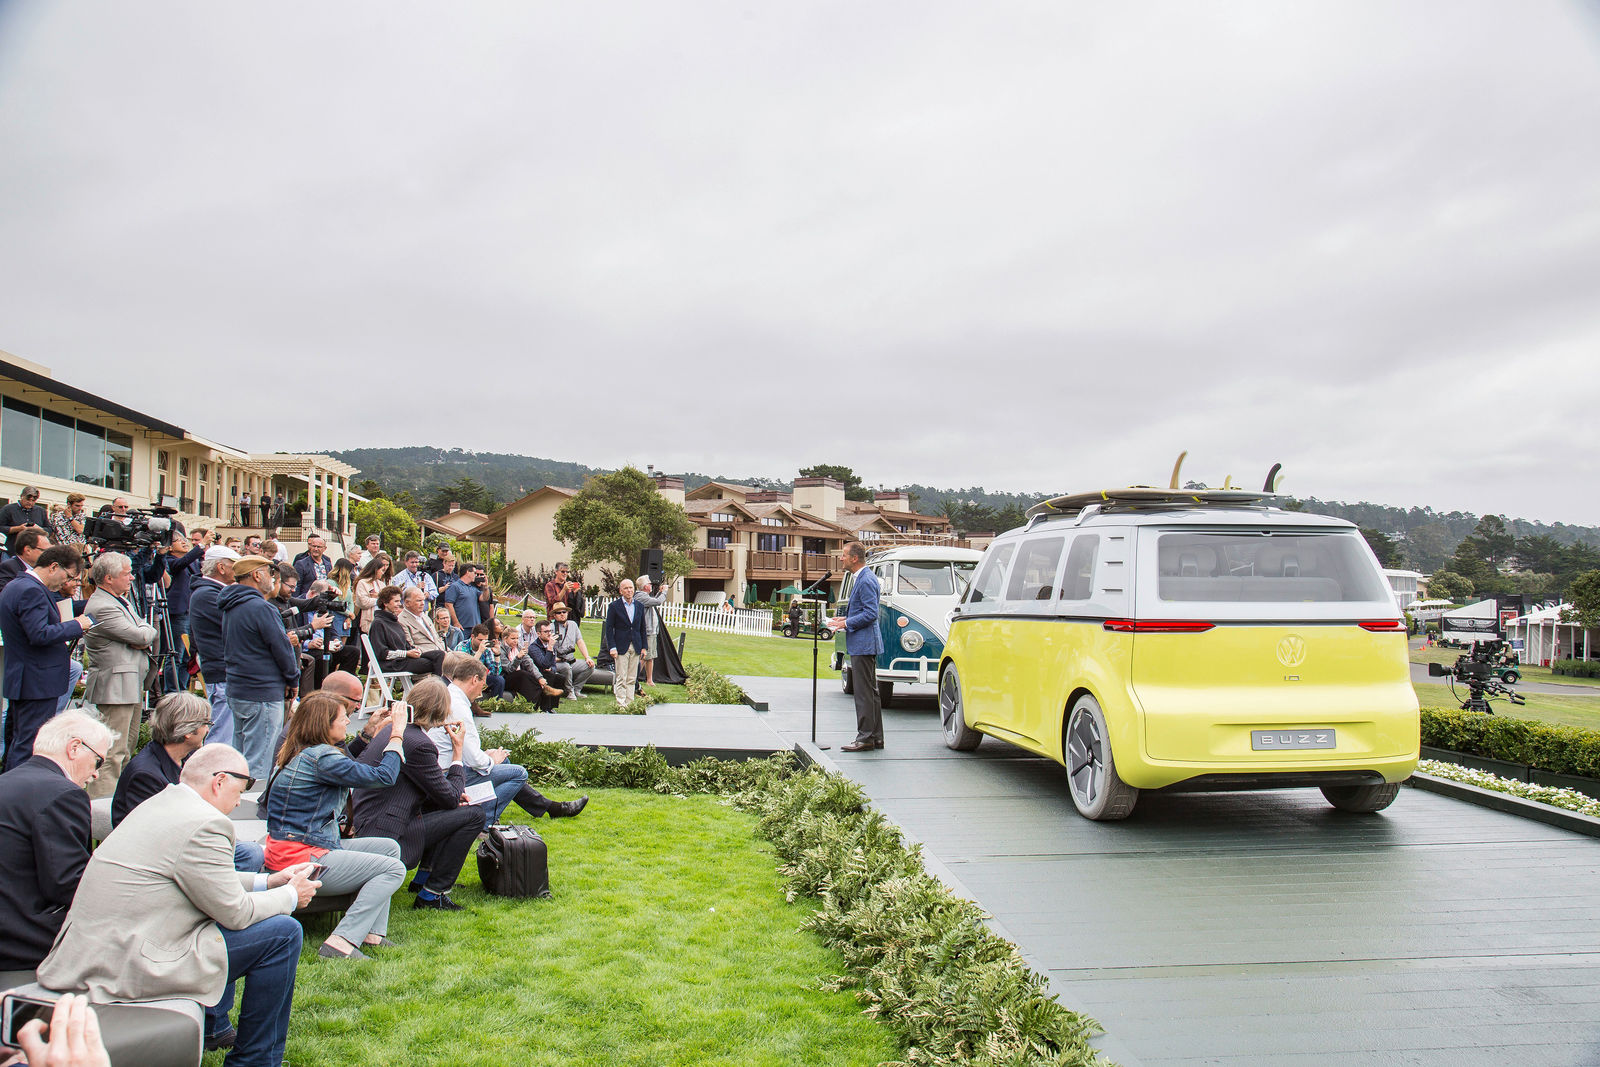 Volkswagen press conference at the Concours d'Elegance in Pebble Beach, California, August 18, 2017 - Series production of the ID. BUZZ based on the concept car announced